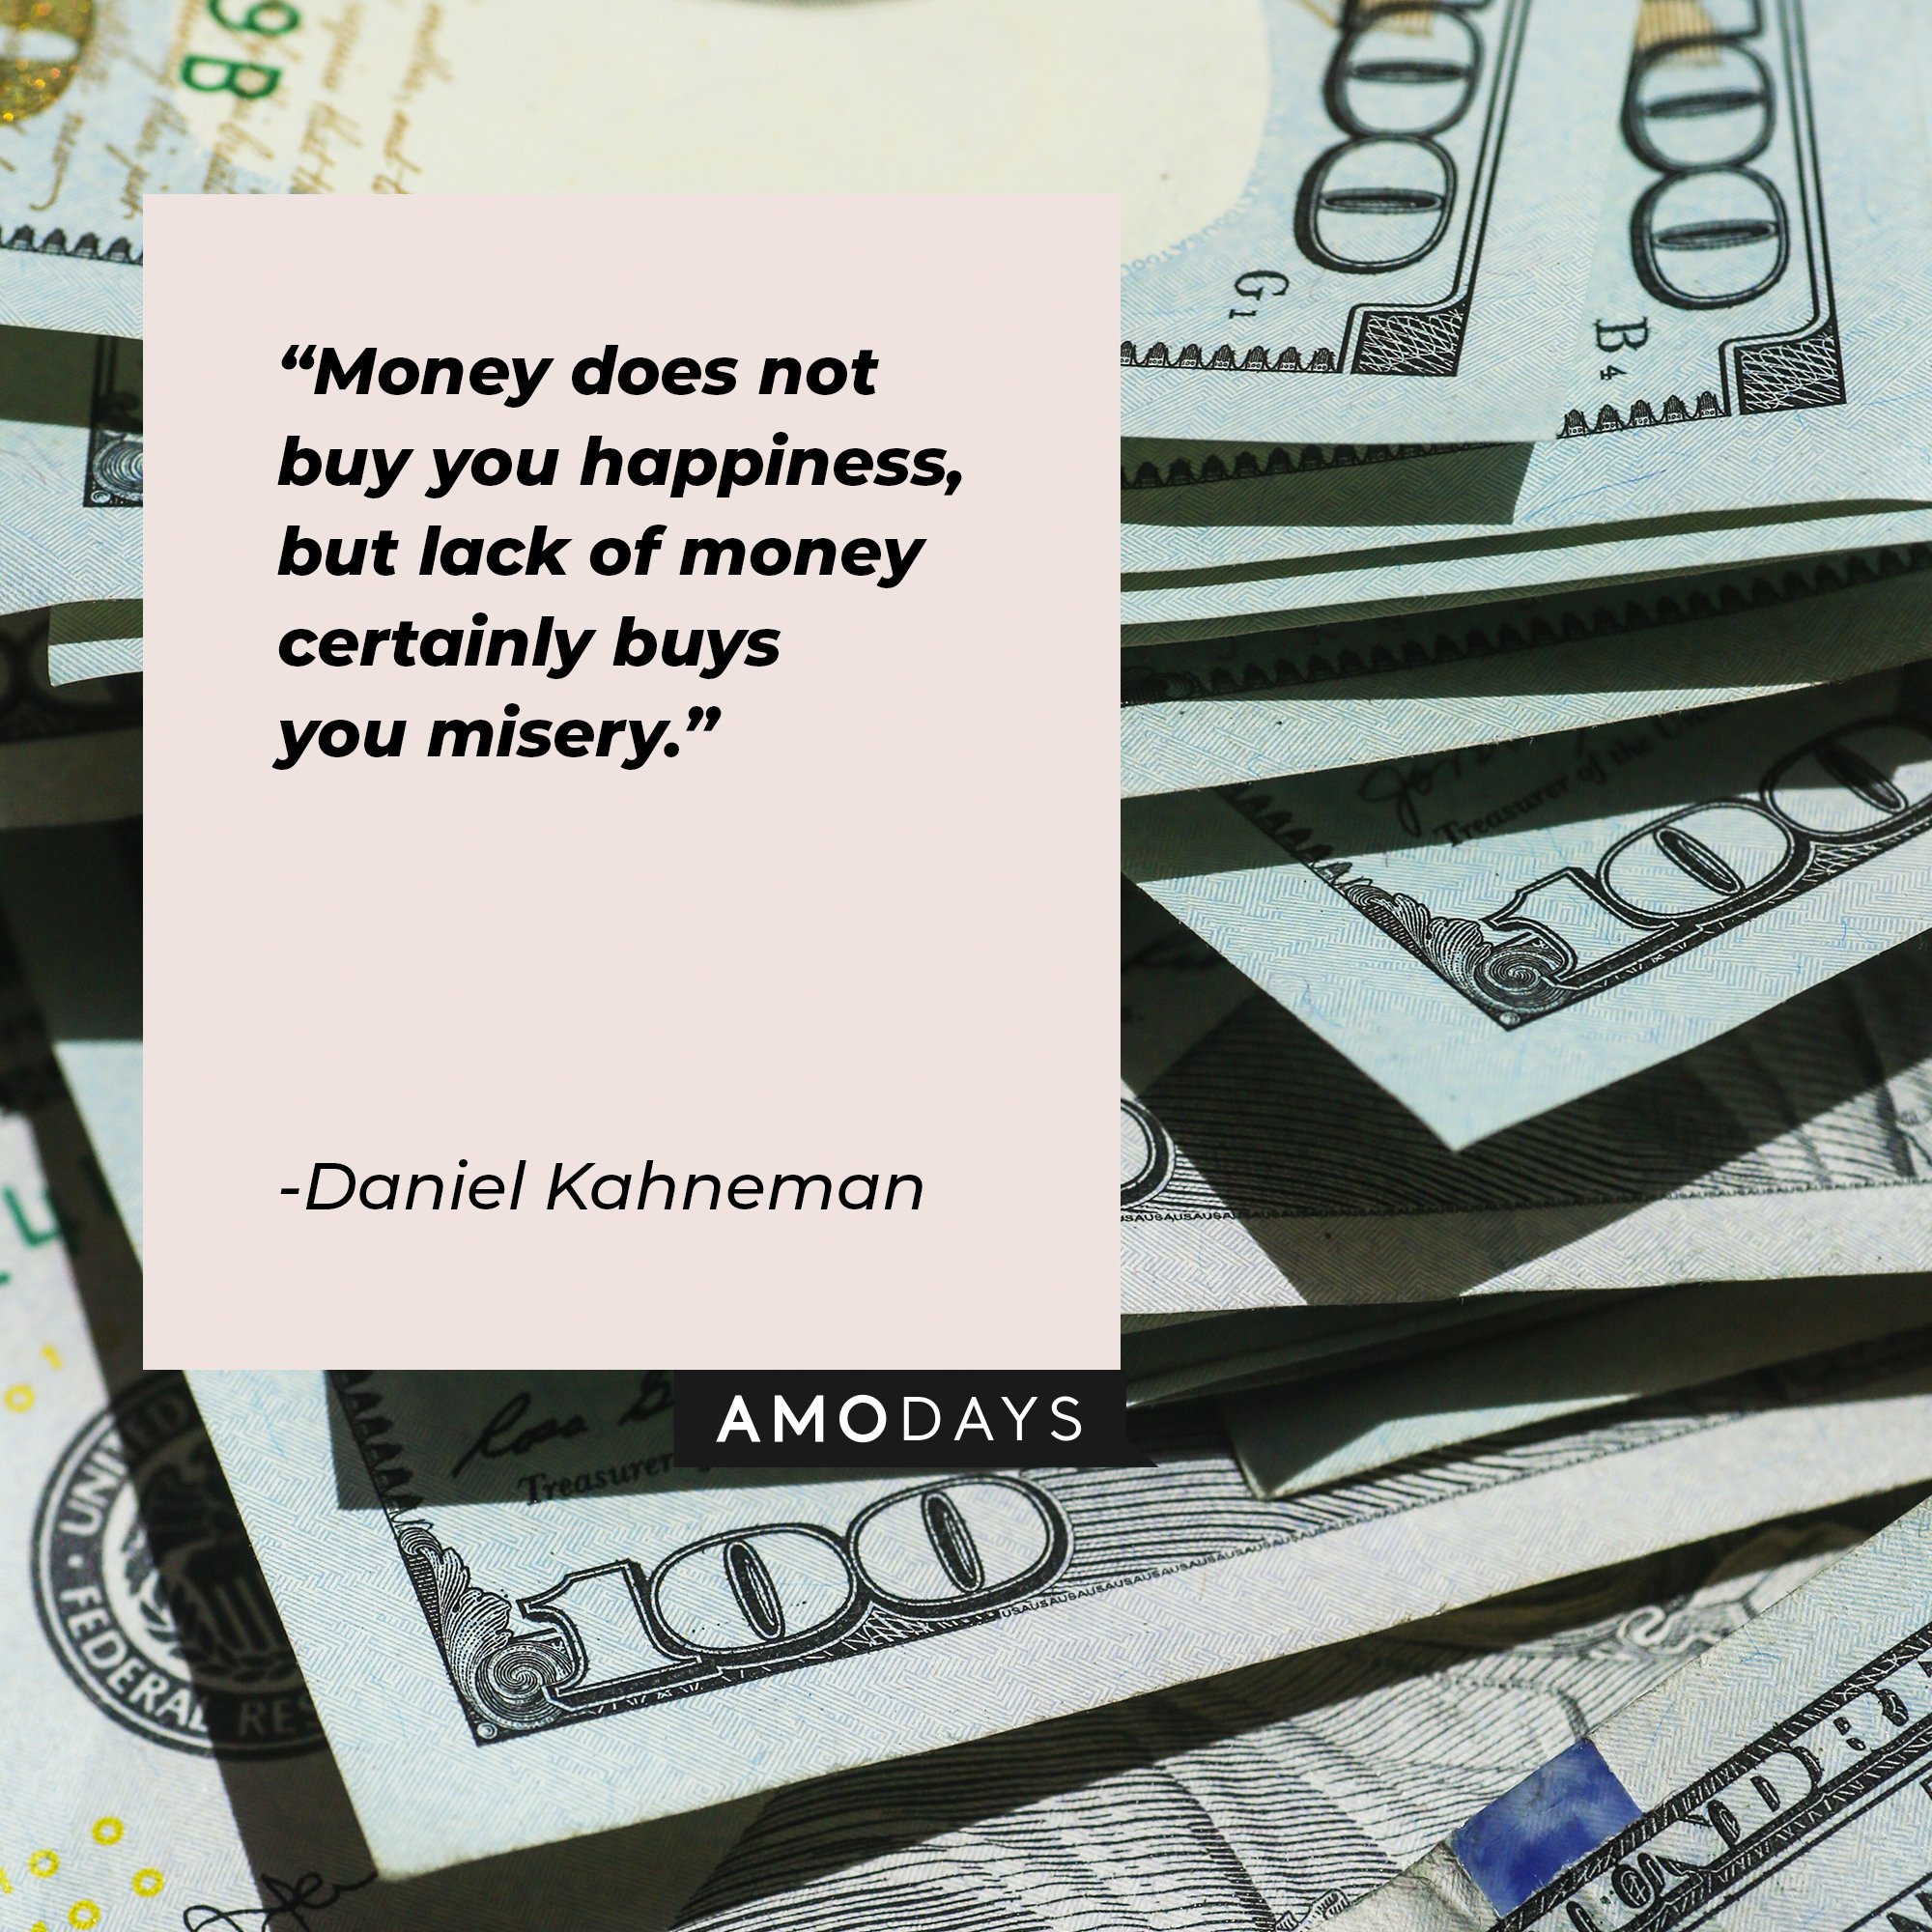 Daniel Kahneman’s quote: "Money does not buy you happiness, but lack of money certainly buys you misery." | Image: AmoDays